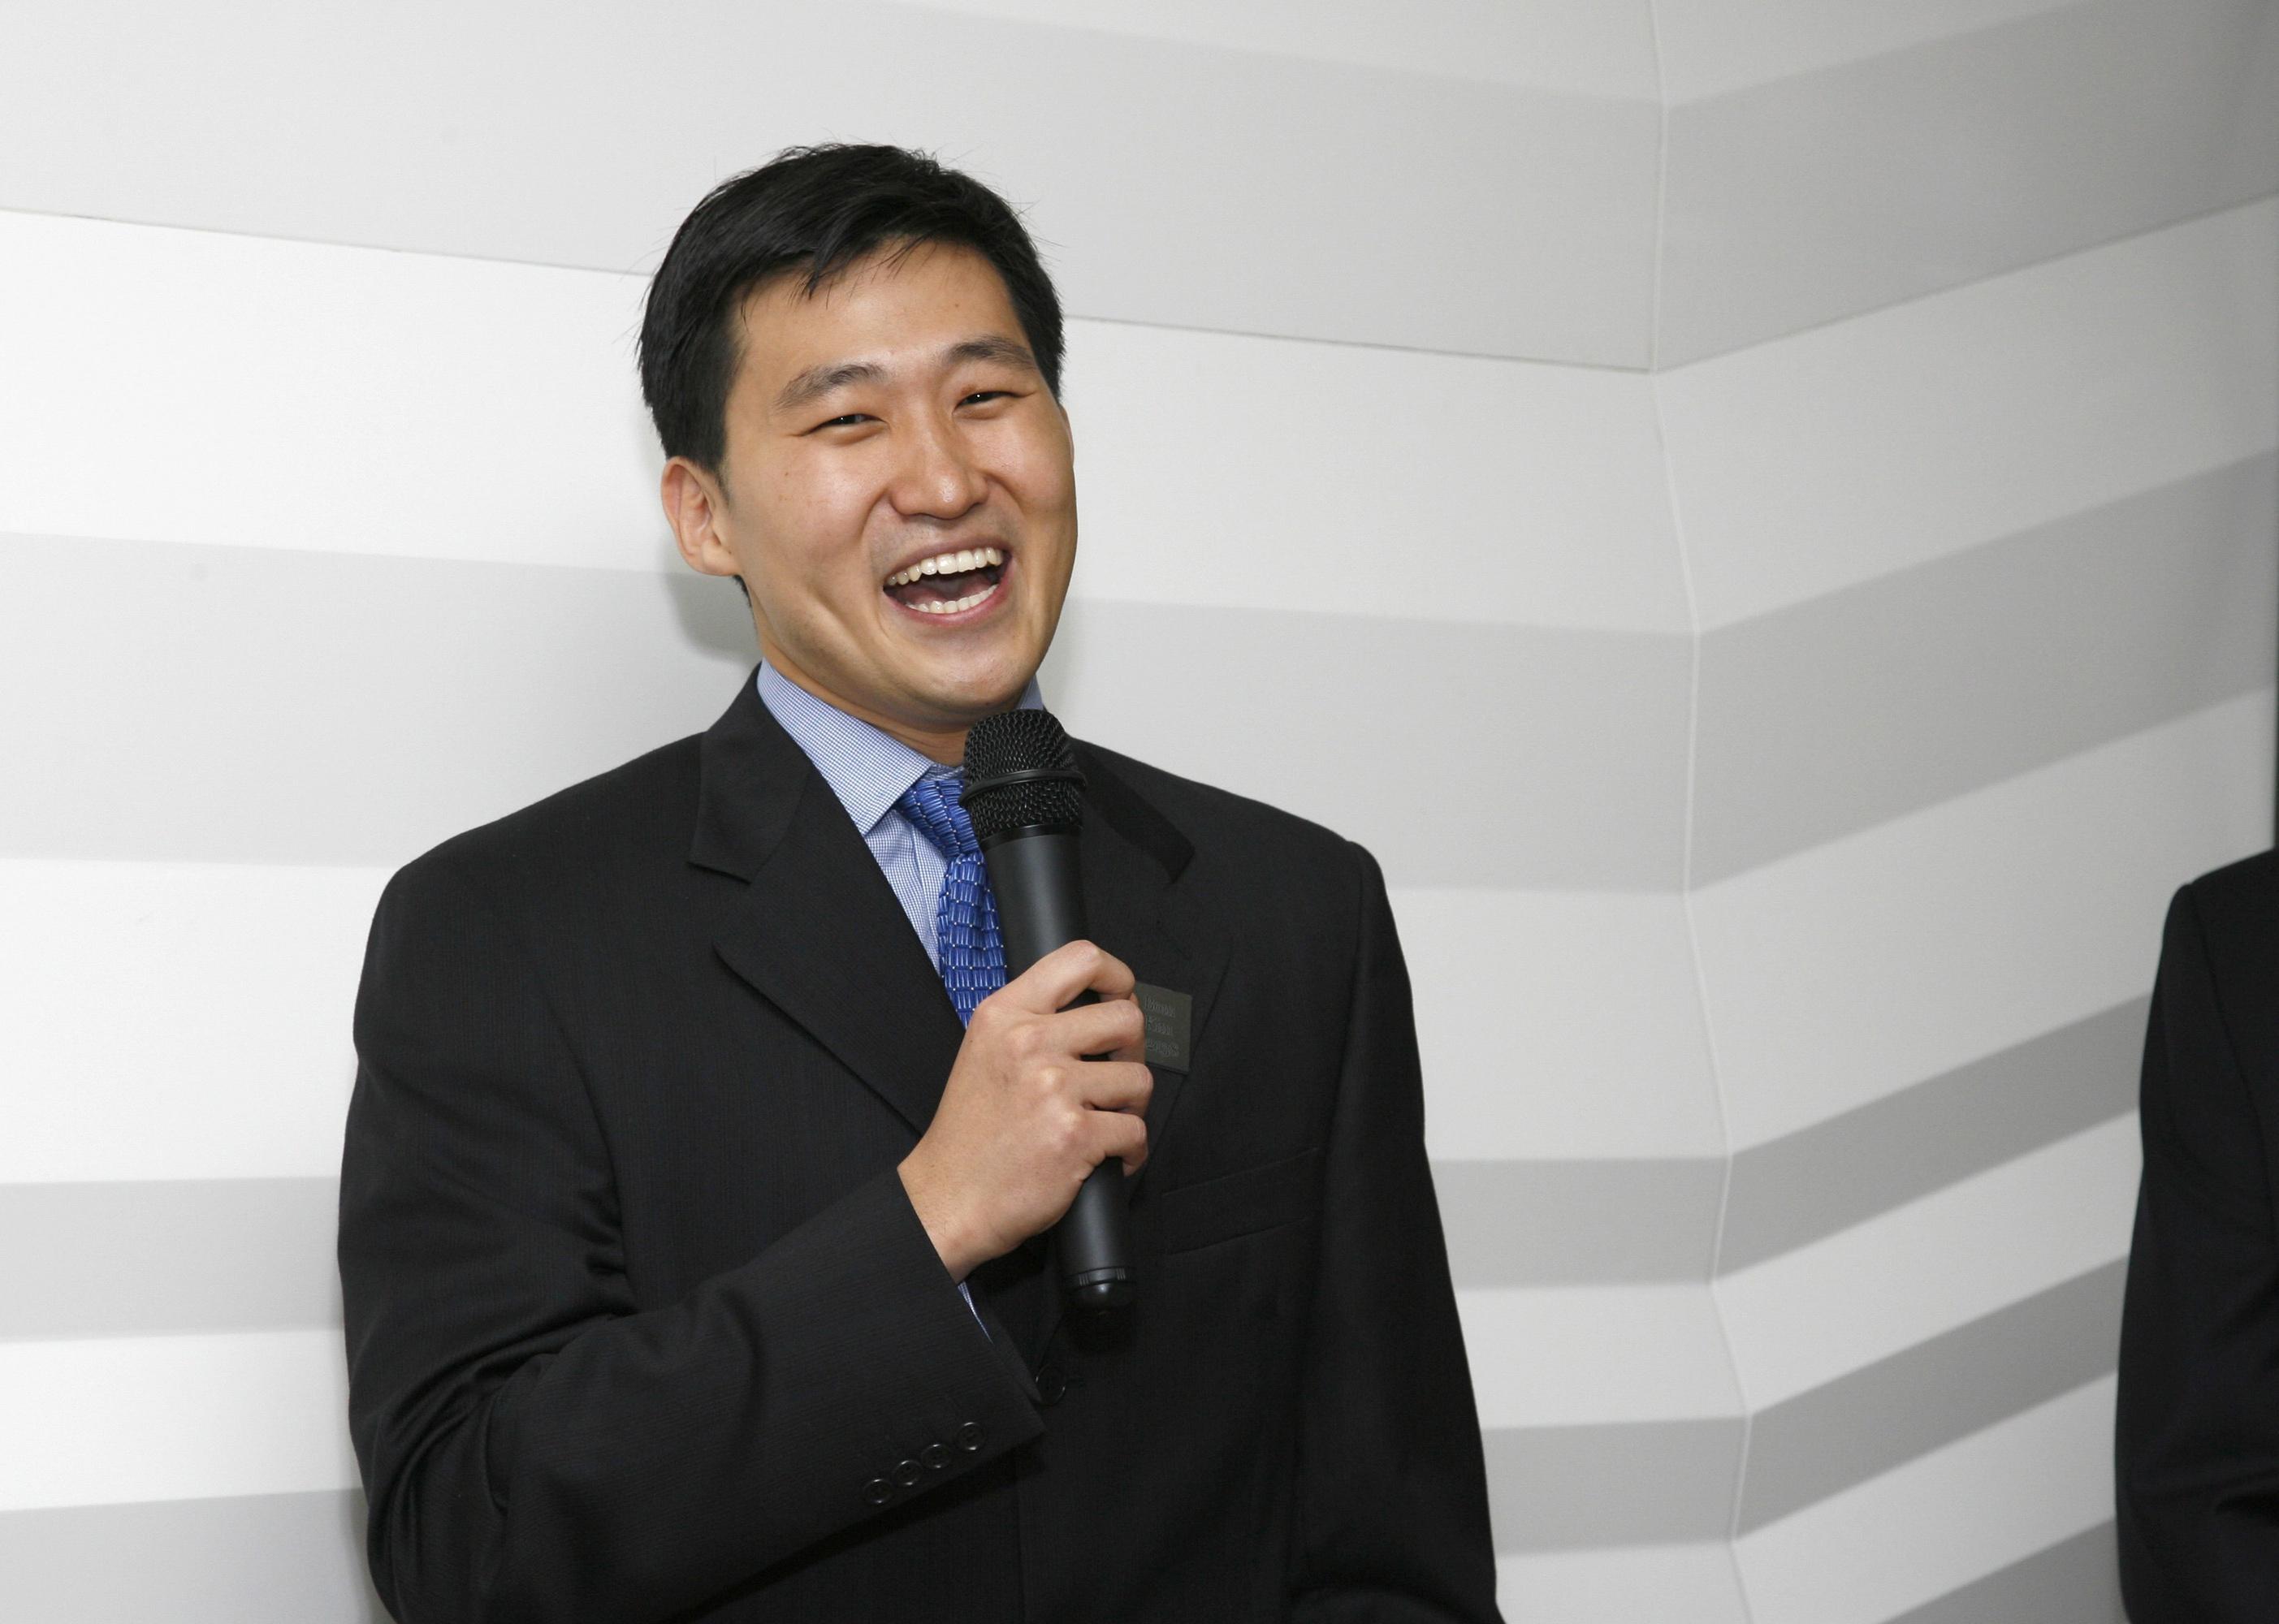 Bom Kim smiling in a suit with a microphone in hand.